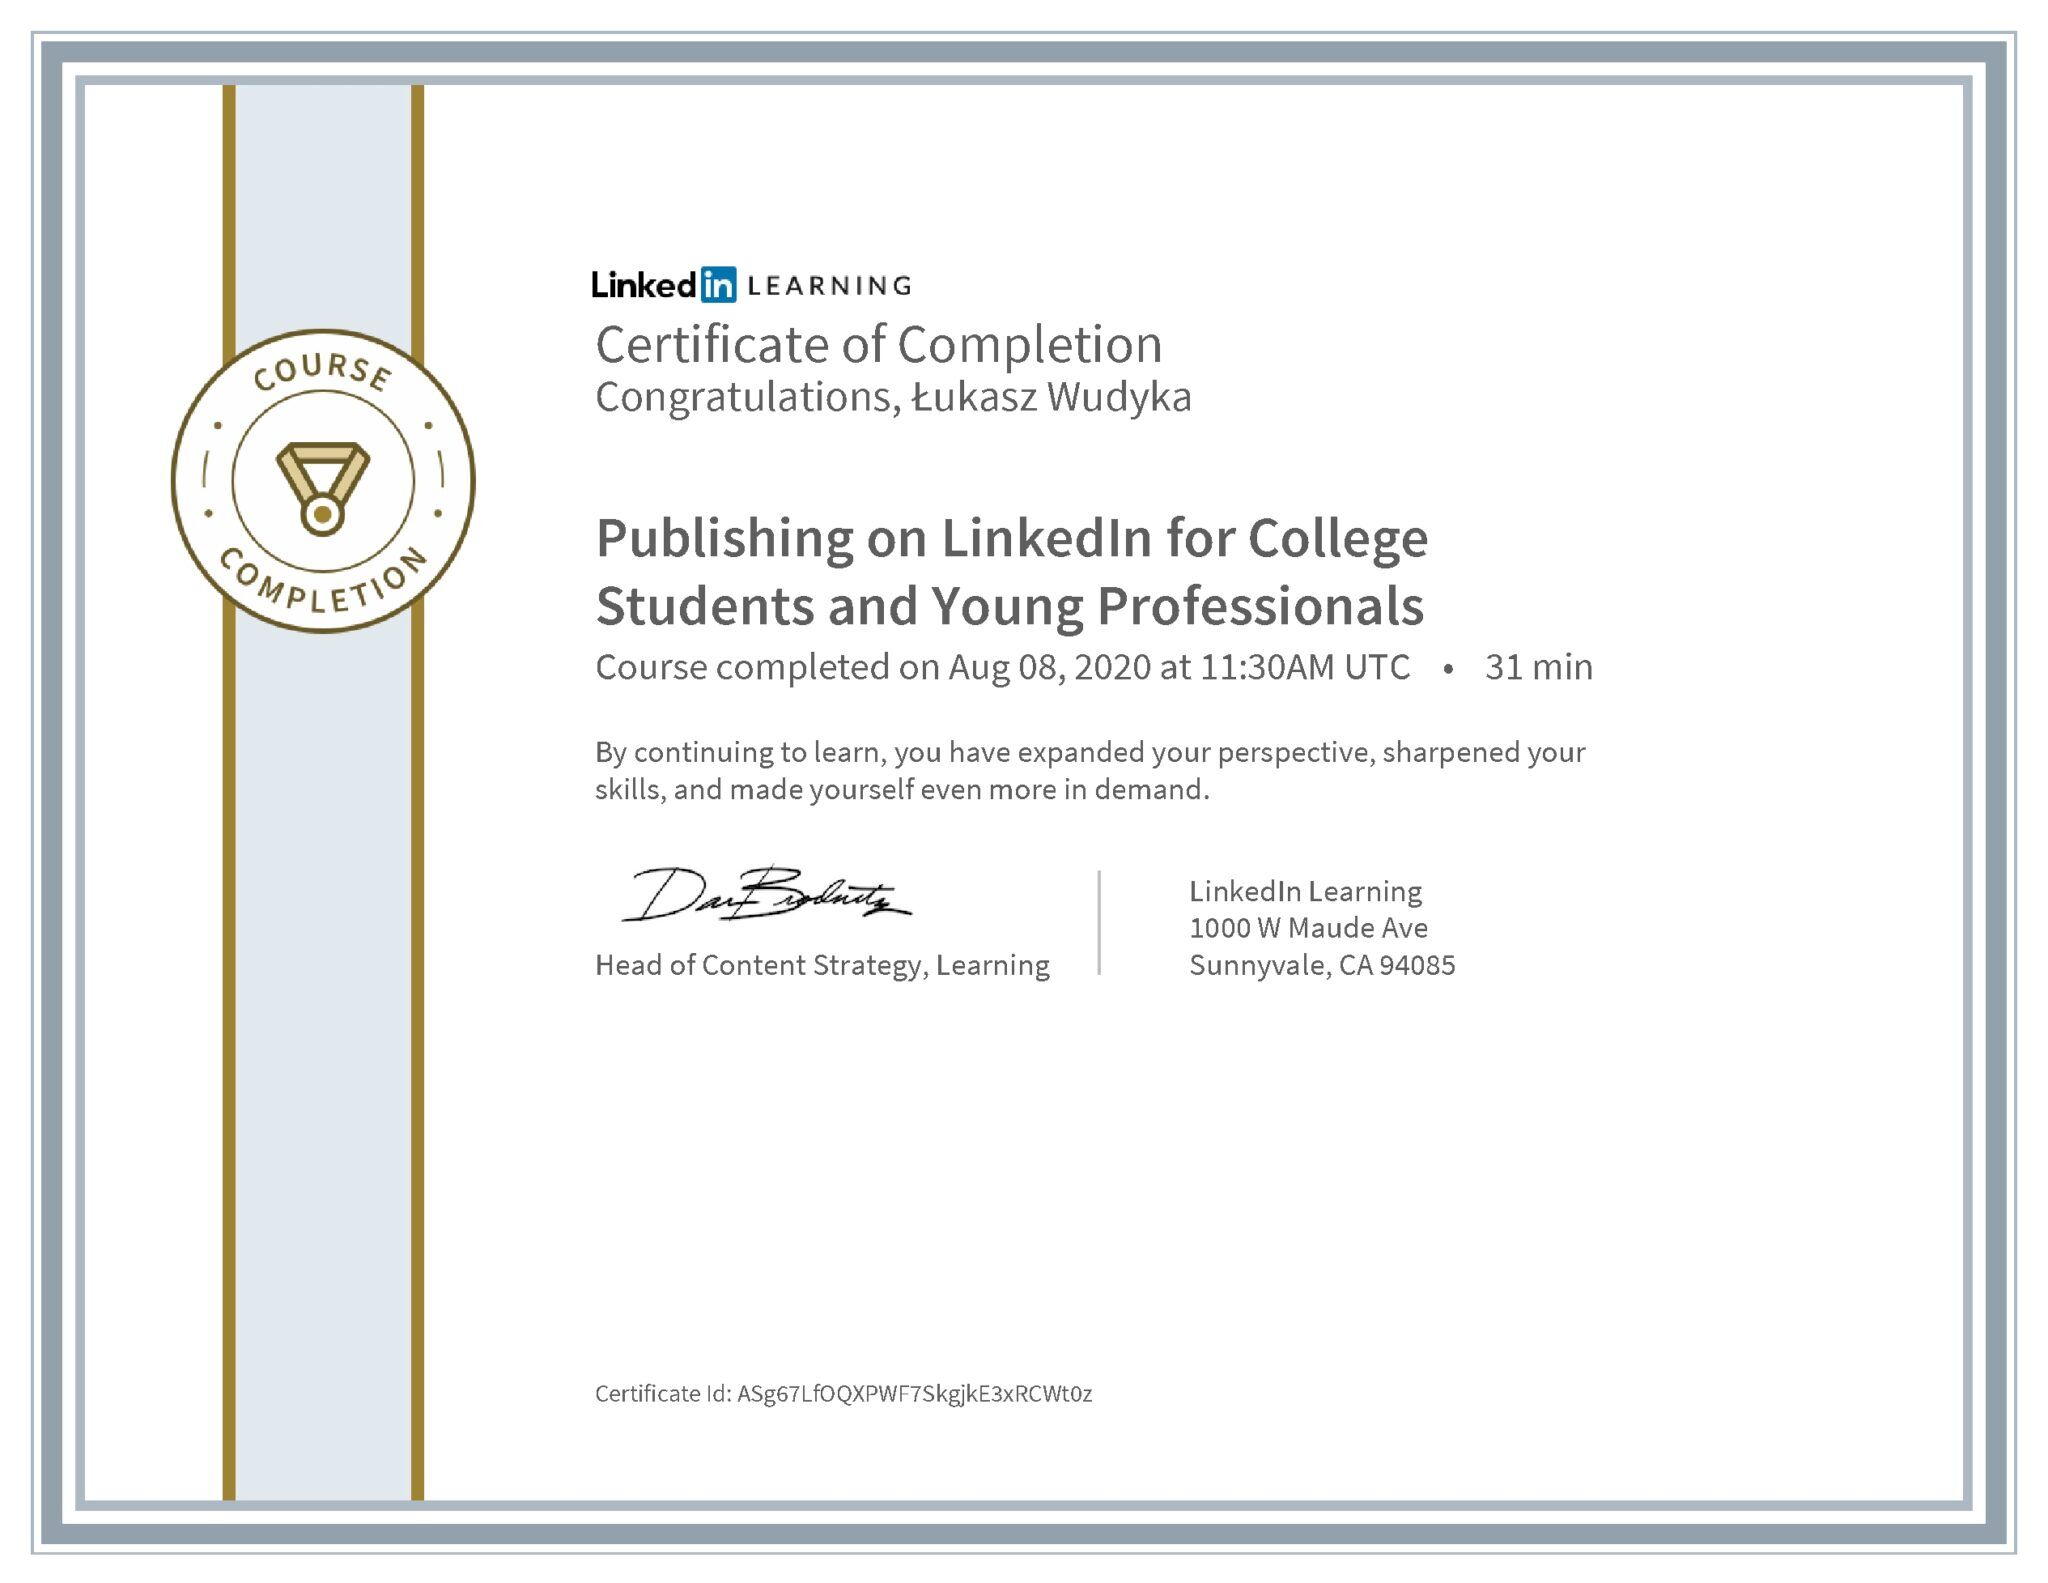 Łukasz Wudyka certyfikat LinkedIn Publishing on LinkedIn for College Students and Young Professionals